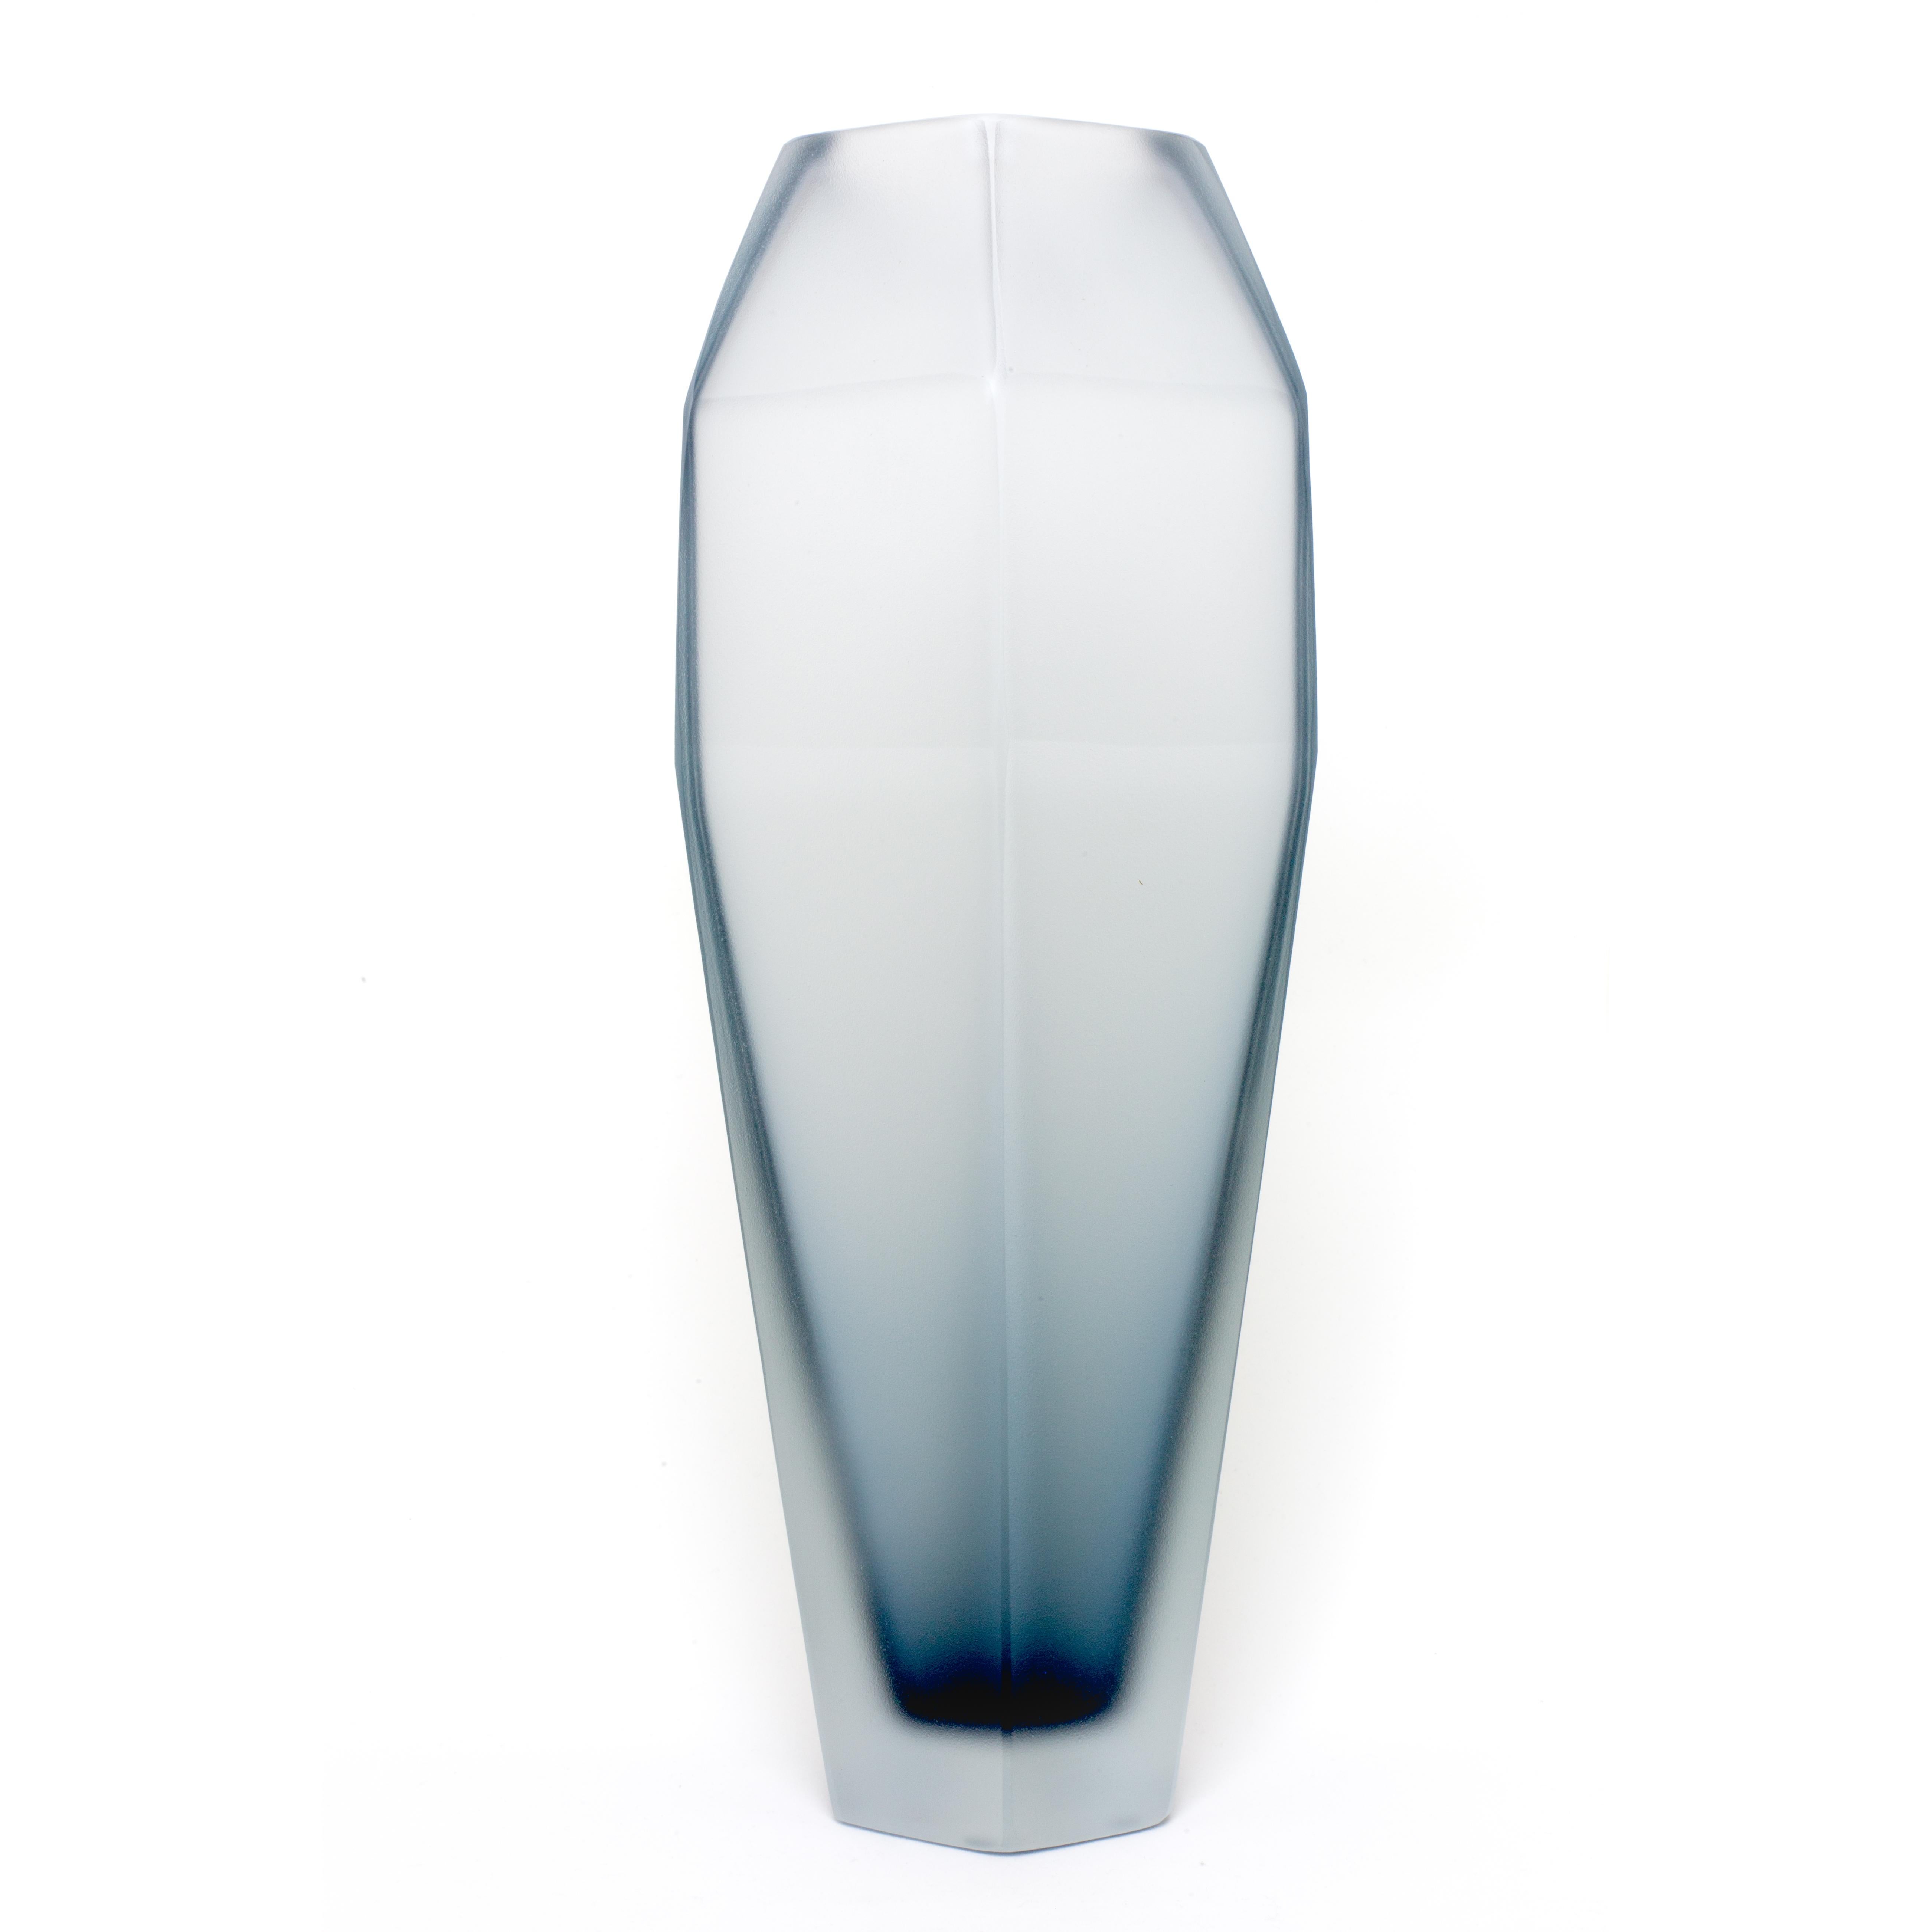 21st century Alessandro Mendini, GEMELLO frosted vase, Murano glass.
Purho continues to search for products with complementary shapes with the pair of Gemello and Gemella vases designed by Alessandro Mendini. Sharing the same design concept, the